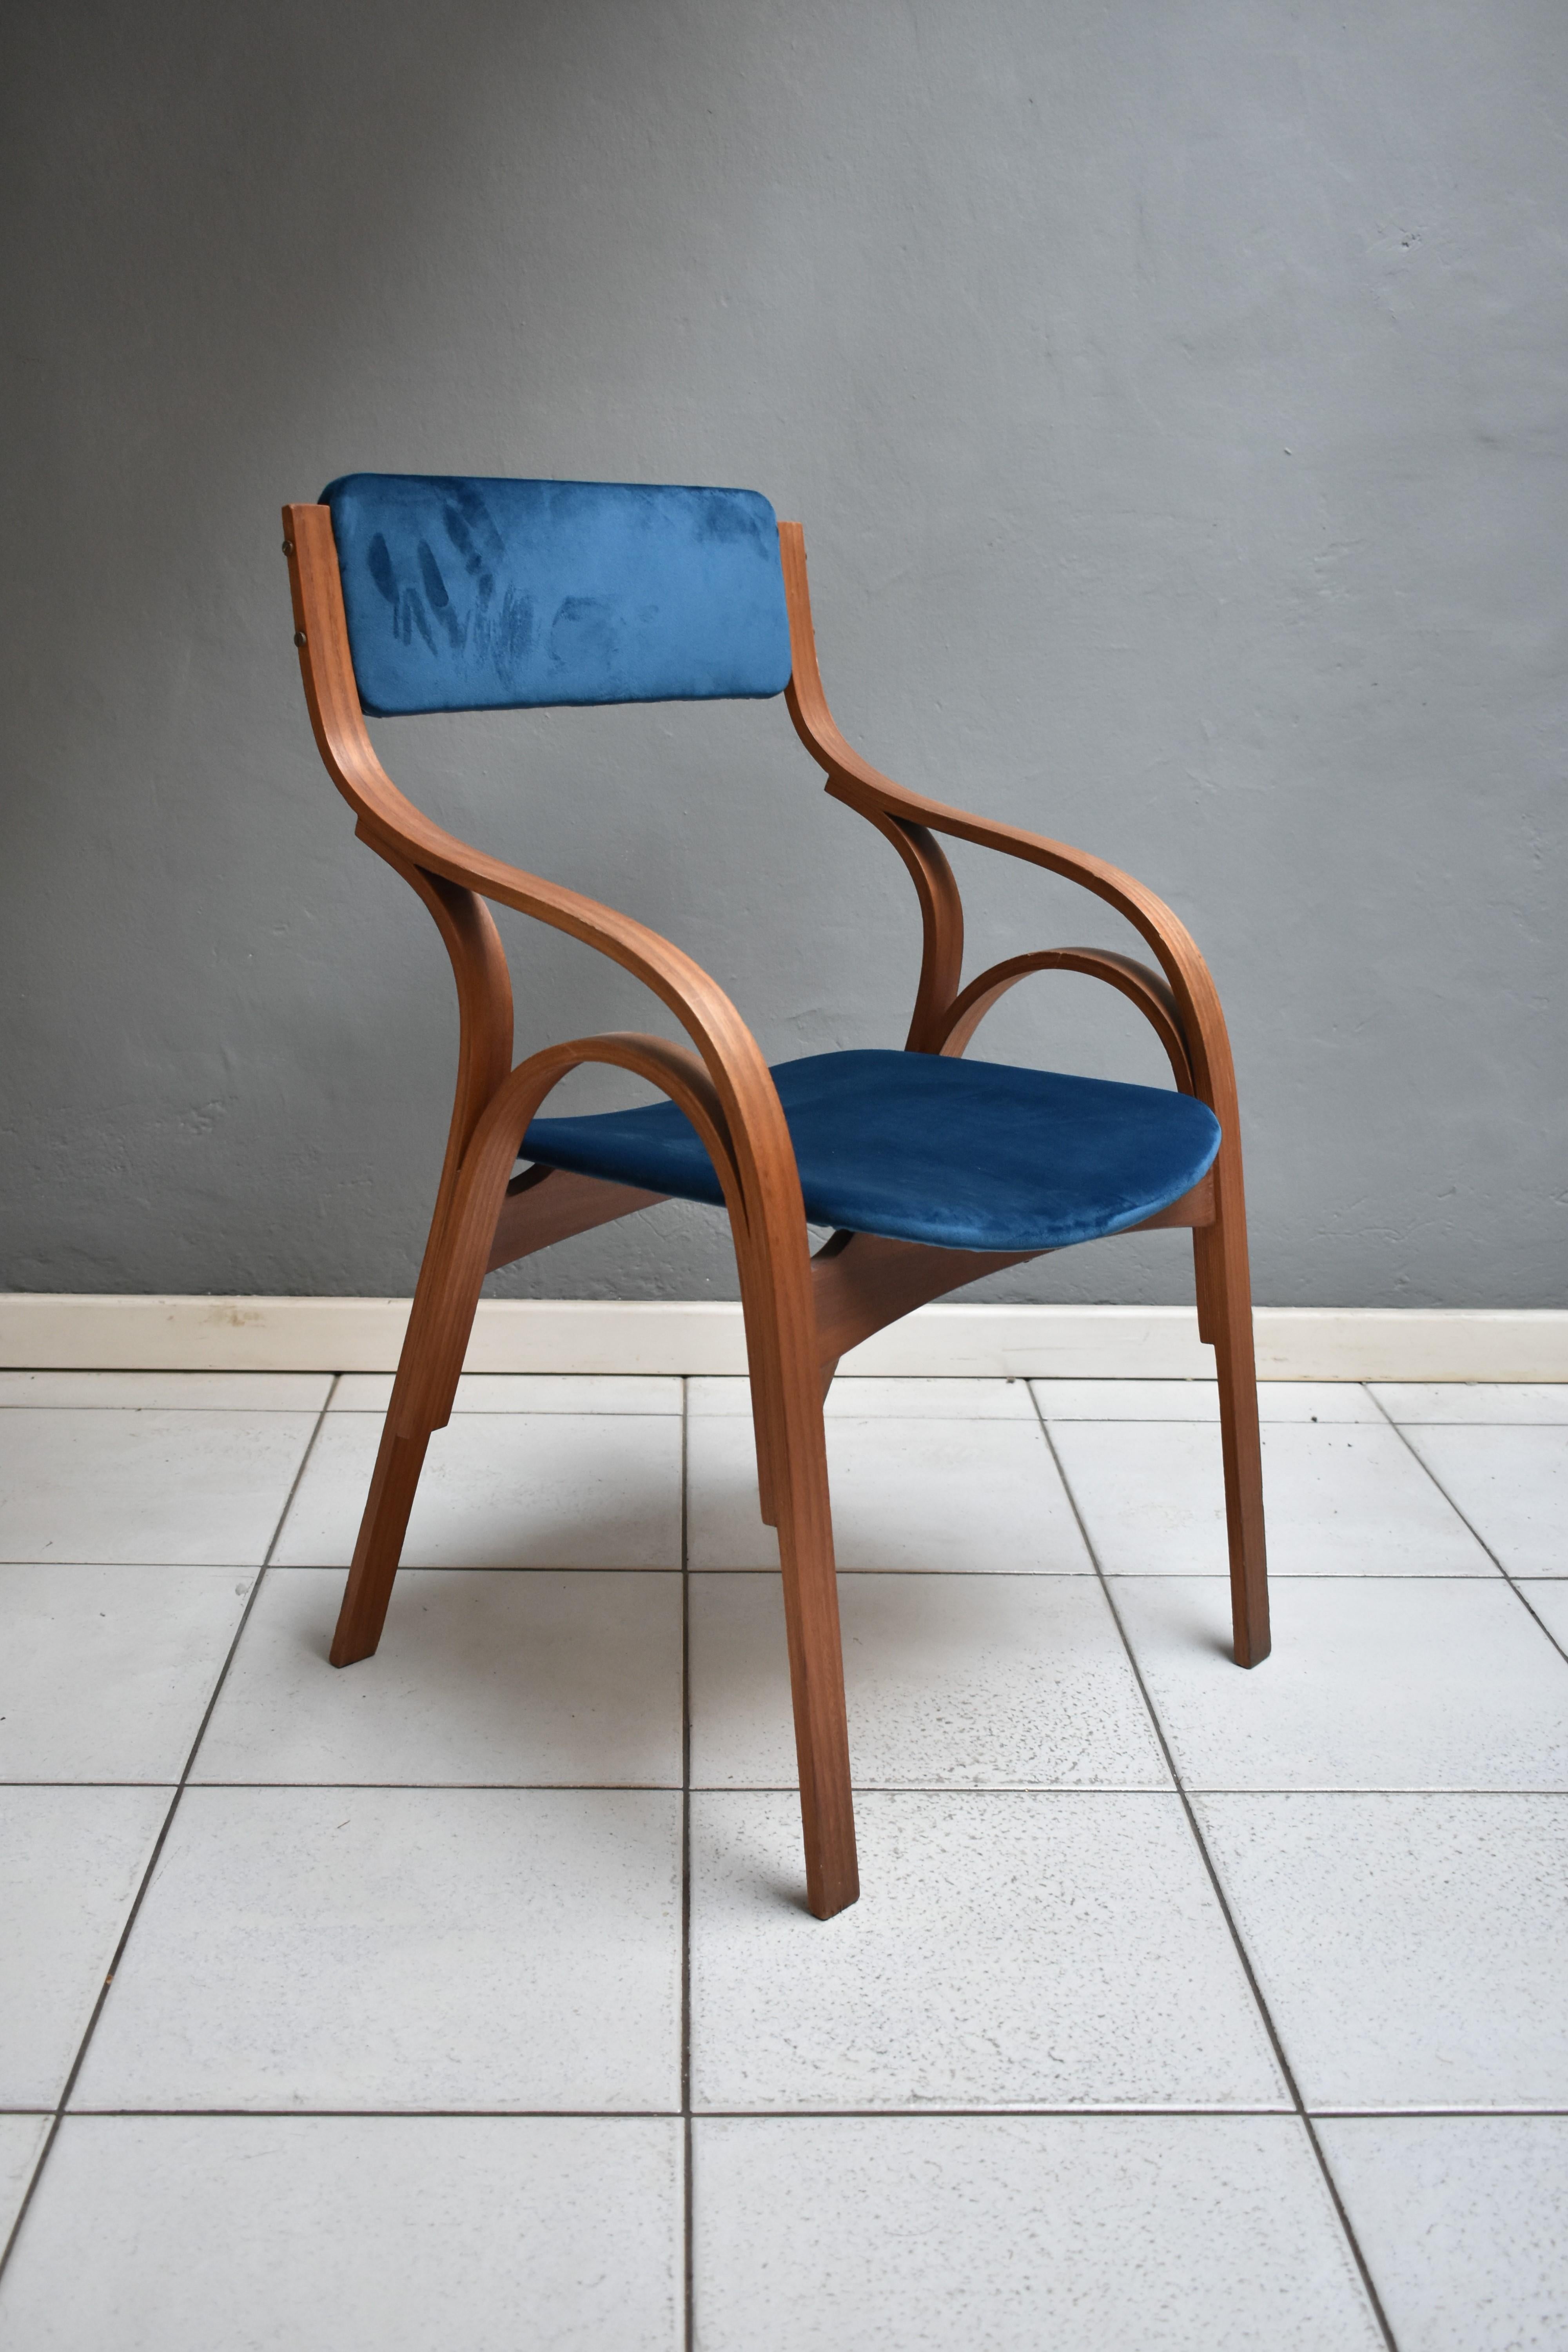 Mid-Century Modern, armchair-chair design by Giotto Stoppino, Lodovico Meneghetti Vittorio Gregotti for Sim
Italian manufacture dating back to the 1960s
Armchair with wooden structure, seat and back in petrol blue velvet.
Very good condition.